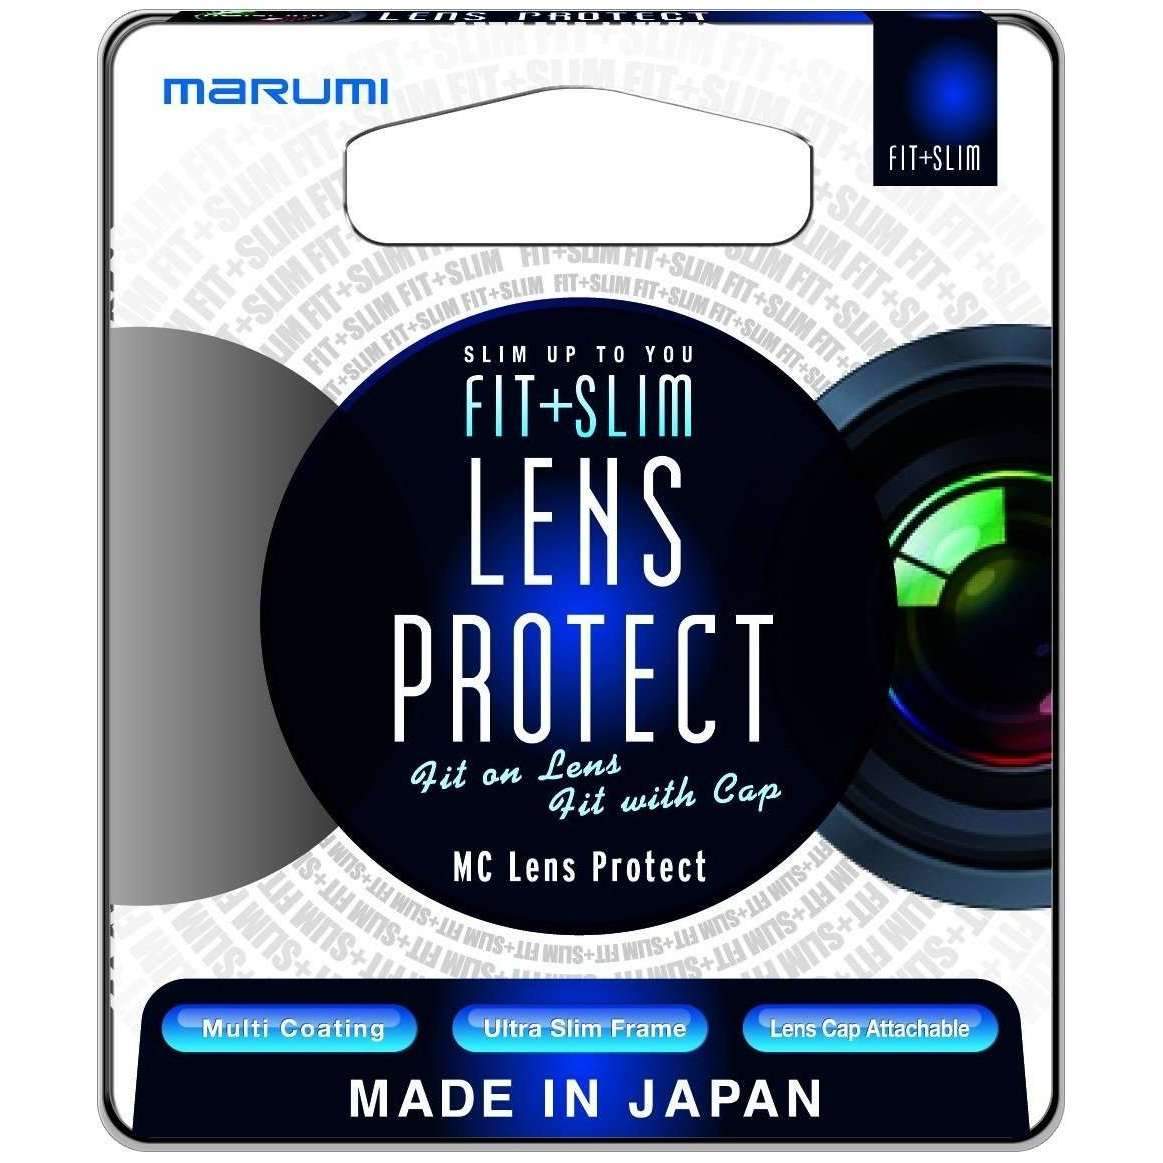 Marumi 67mm Fit + Slim Multi Coated Lens Protect Filter Marumi Filter - UV/Protection